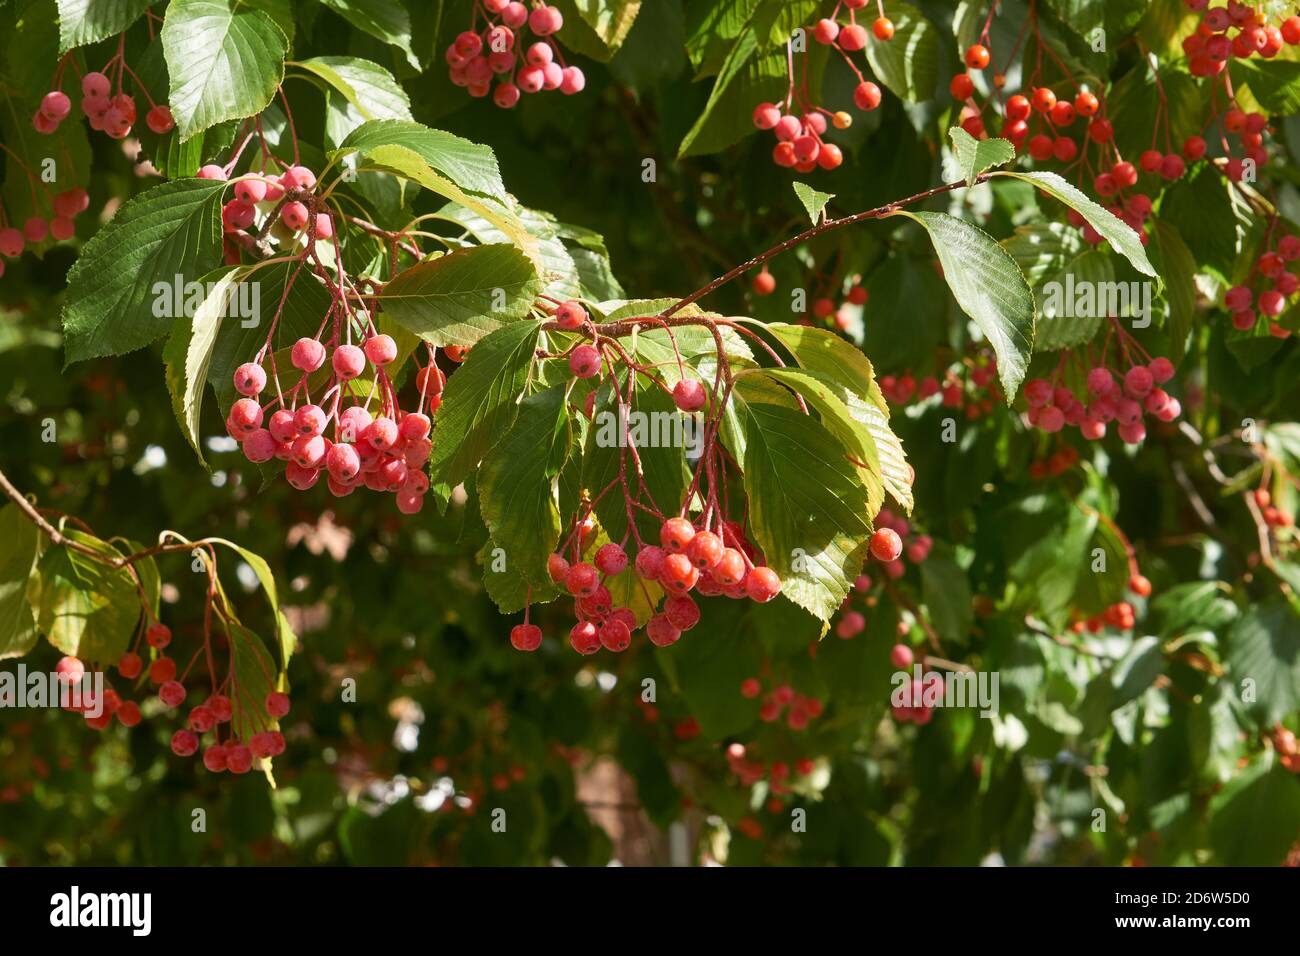 Closeup of red berries hanging from the branches of a Hawthorn tree in the fall, Vancouver, British Columbia, Canada Stock Photo